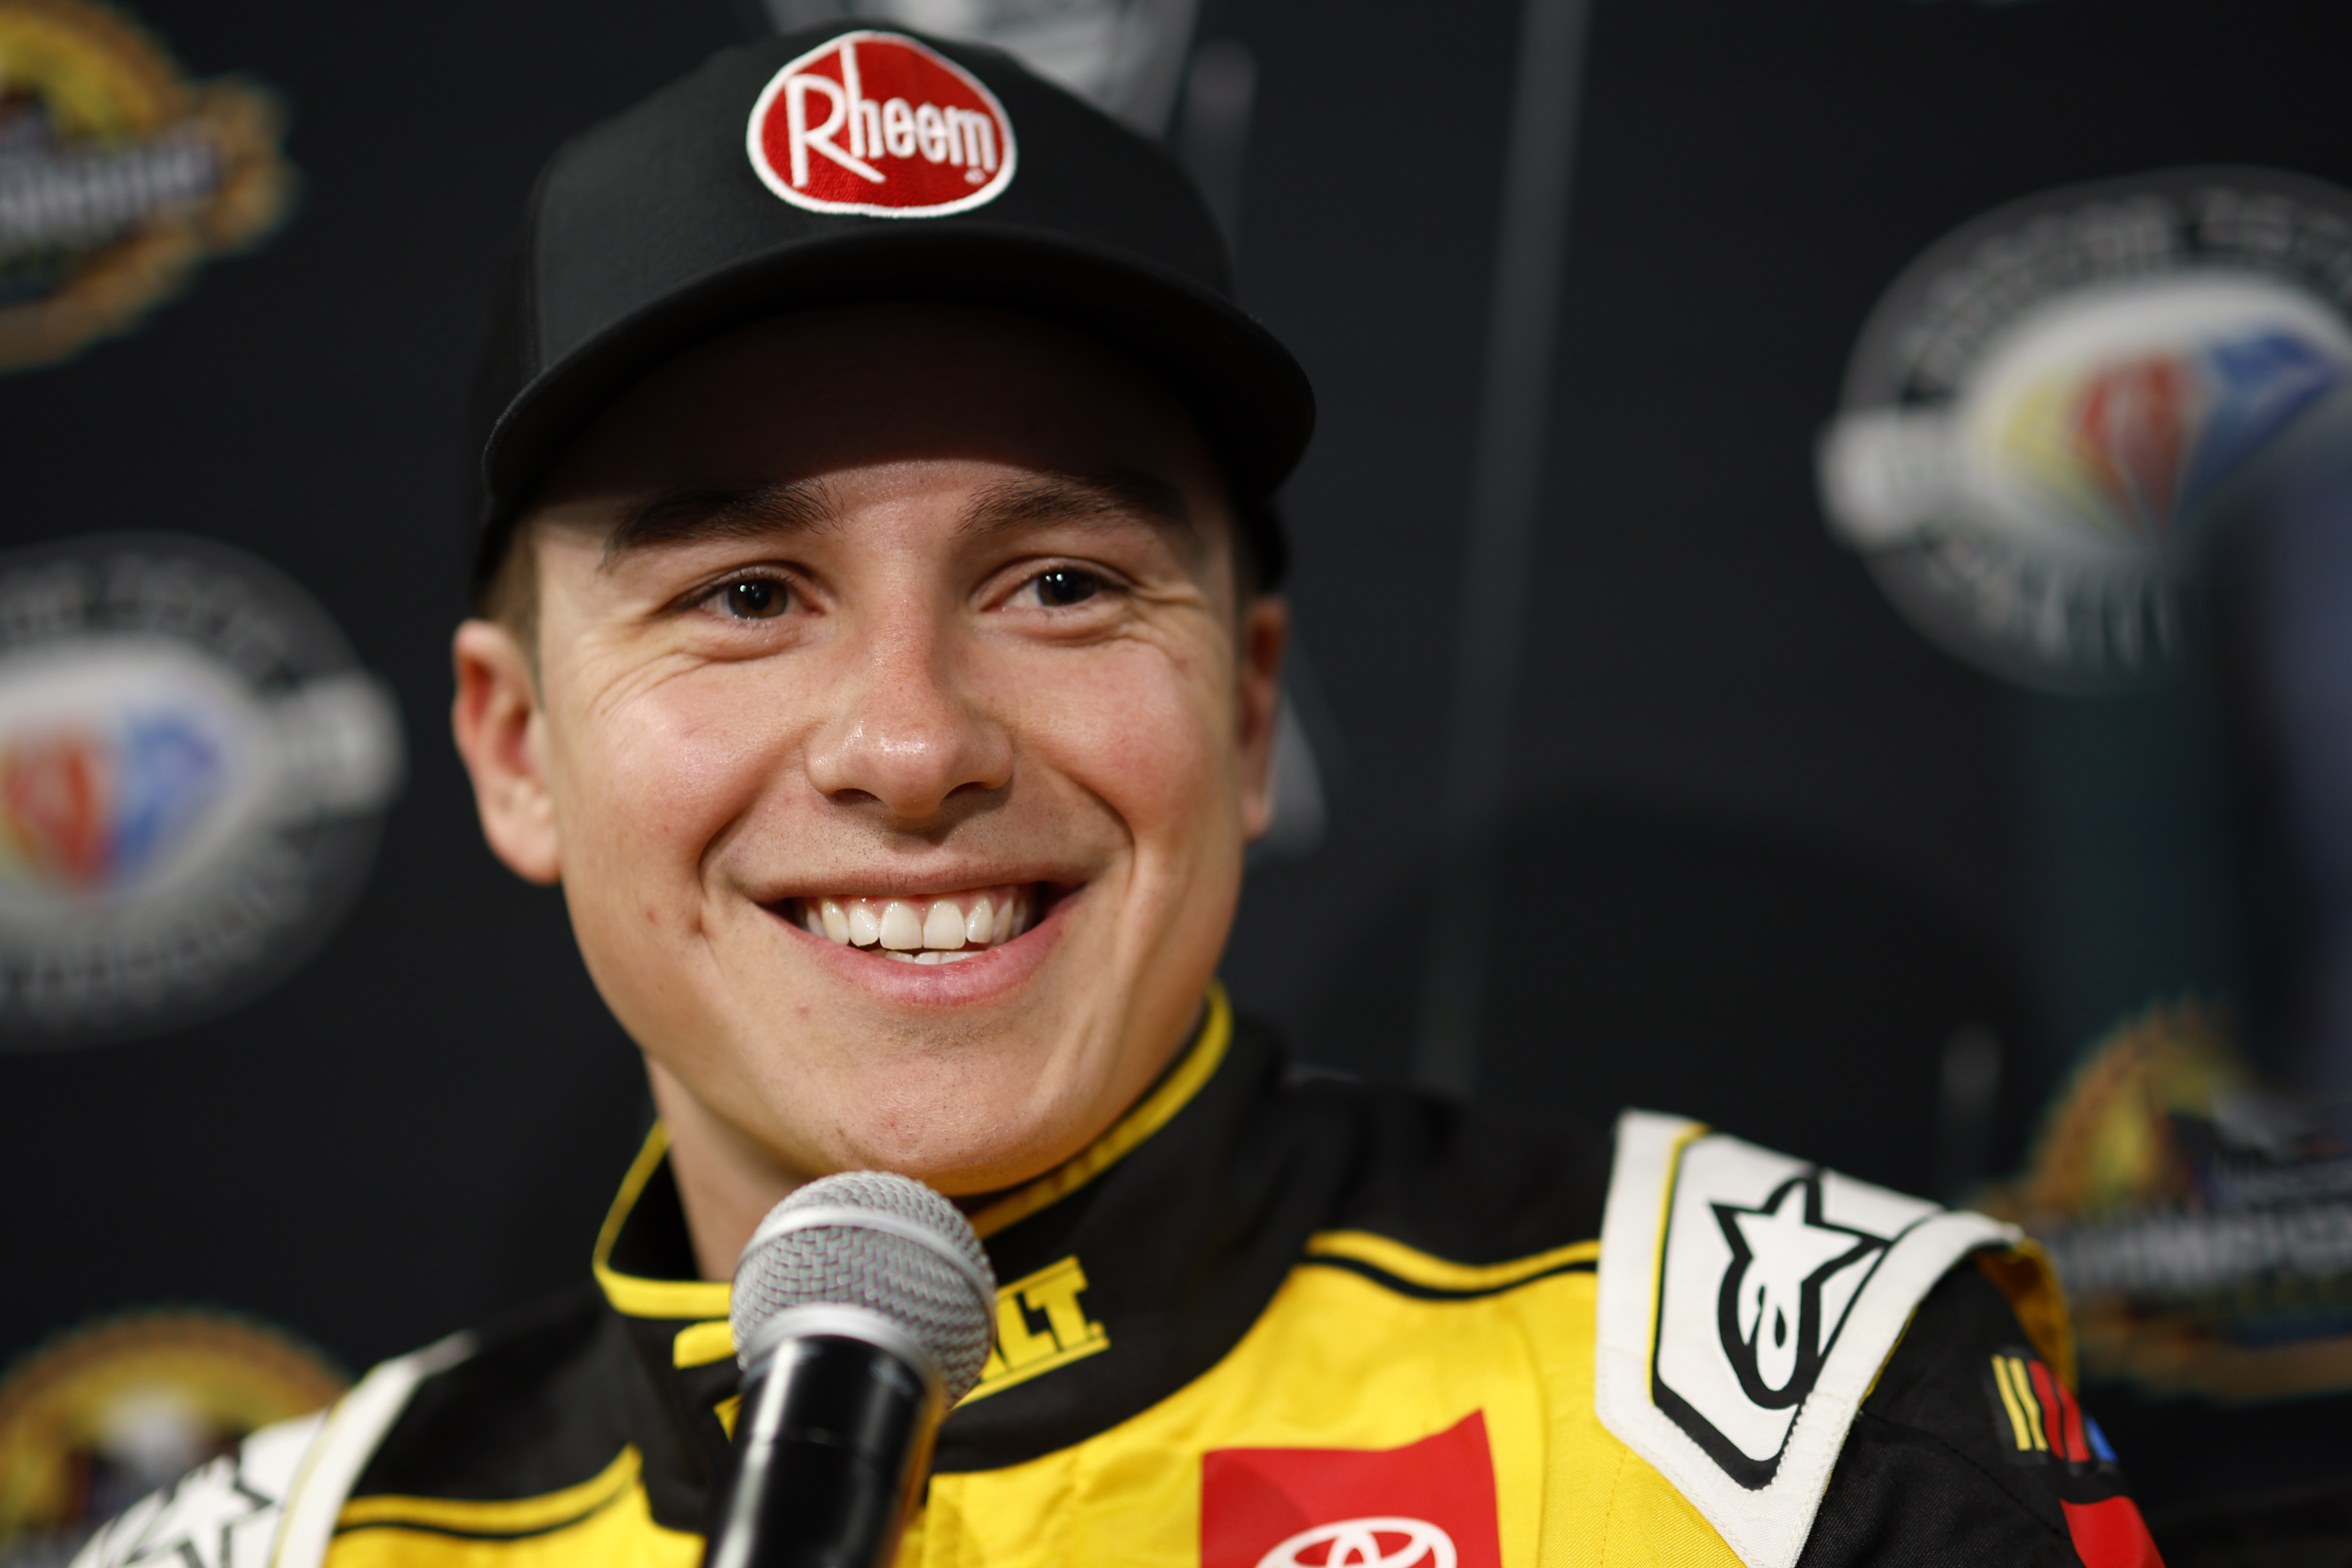 Christopher Bell (Photo by Sean Gardner/Getty Images)